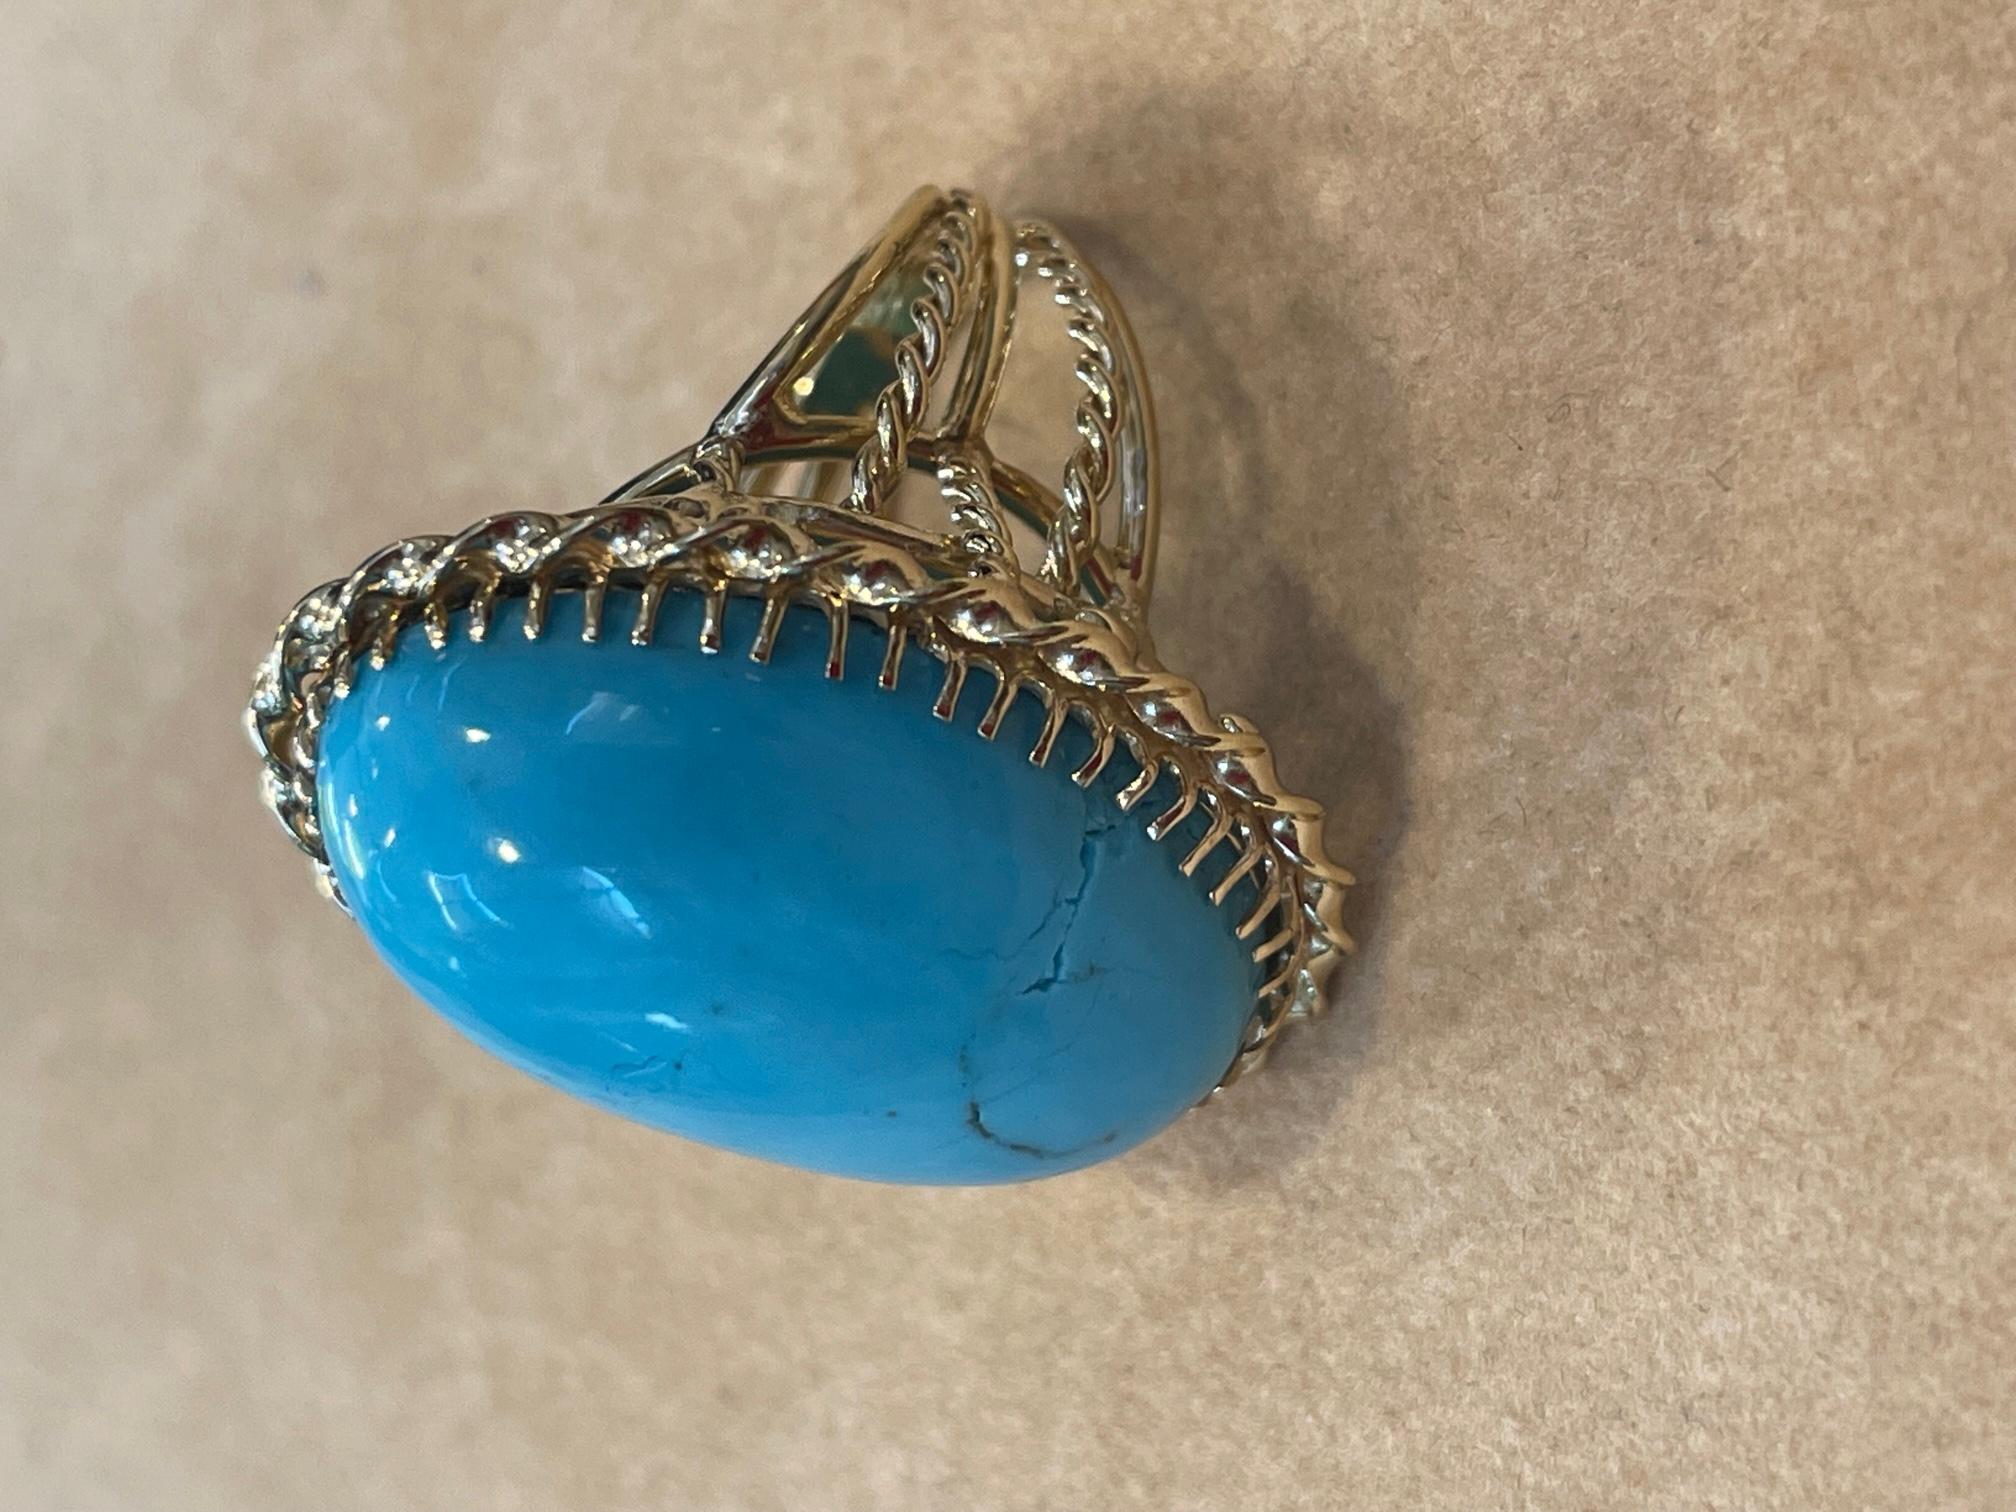 Vintage 75 Ct Natural Oval Sleeping Beauty Turquoise Ring, 18 Kt Yellow Gold For Sale 3